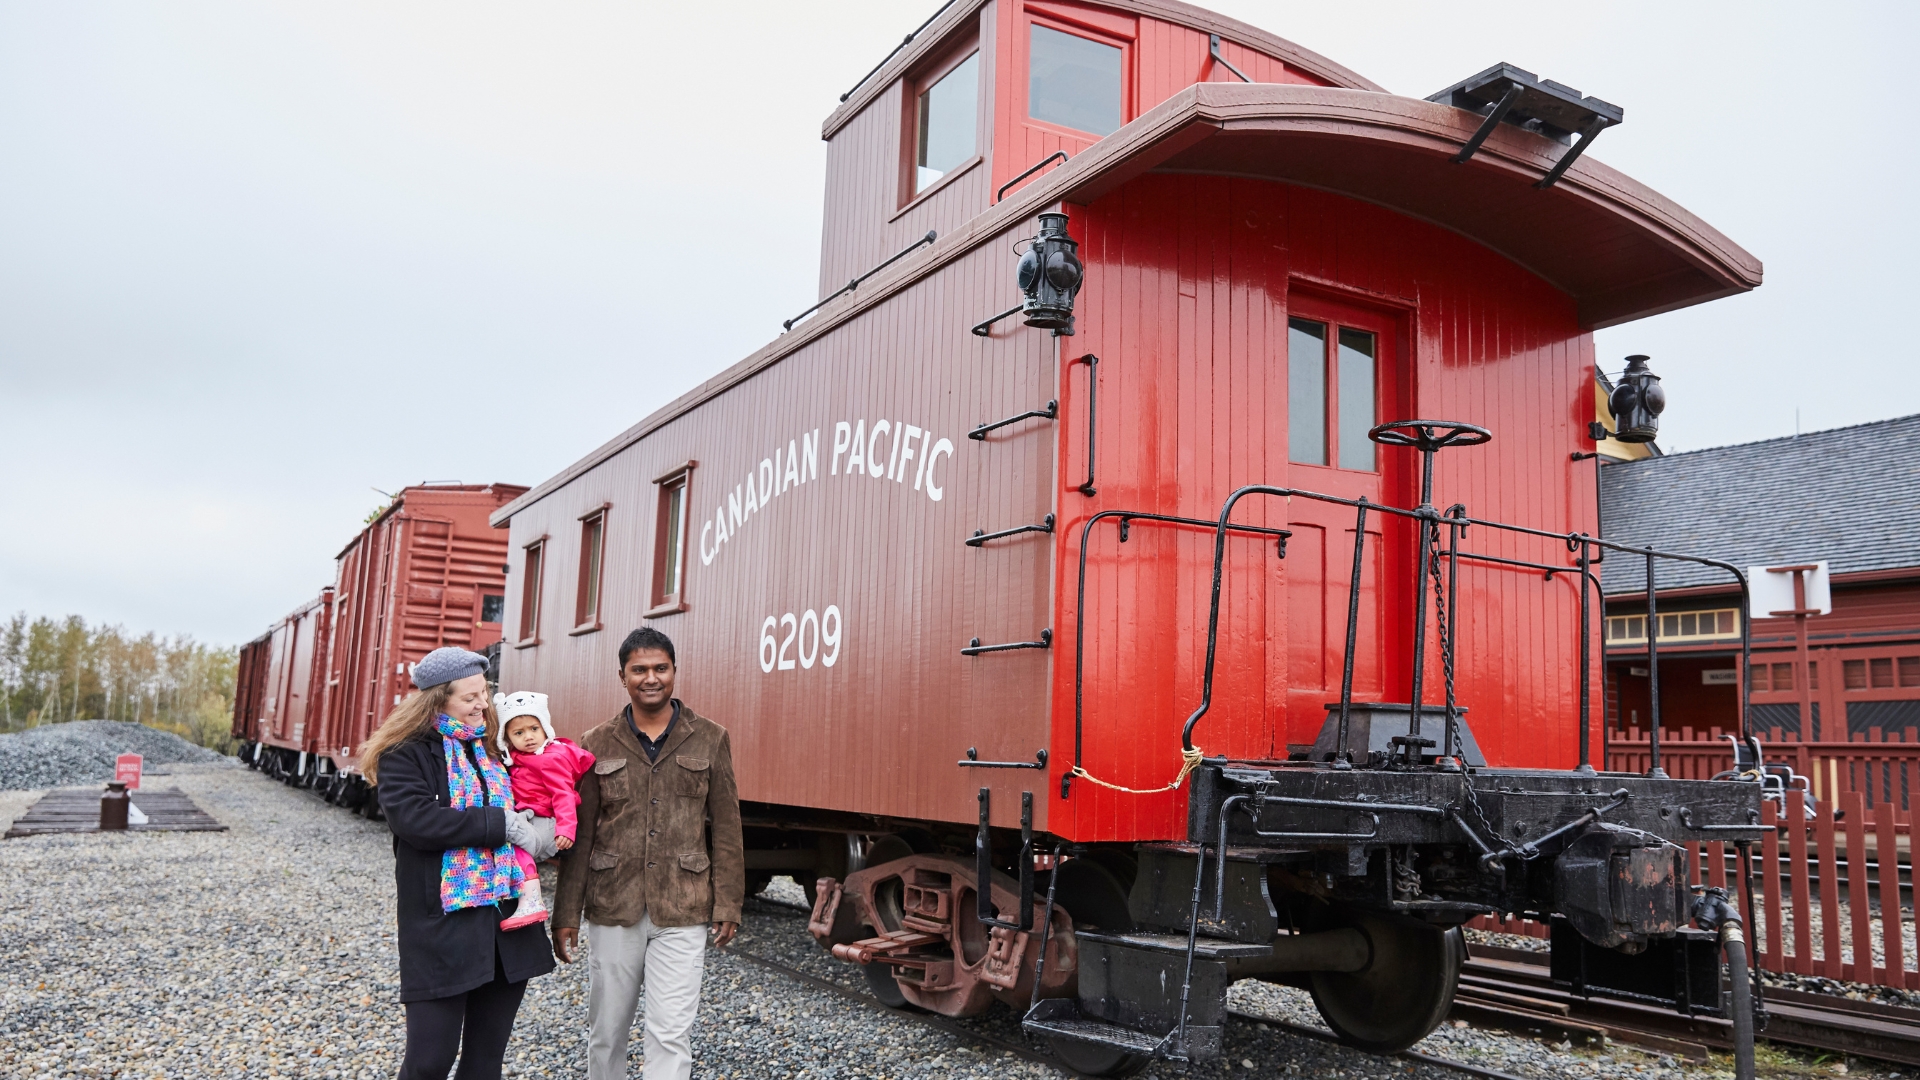 A family walking past CPR Caboose #6209 at Railway Days Heritage Park